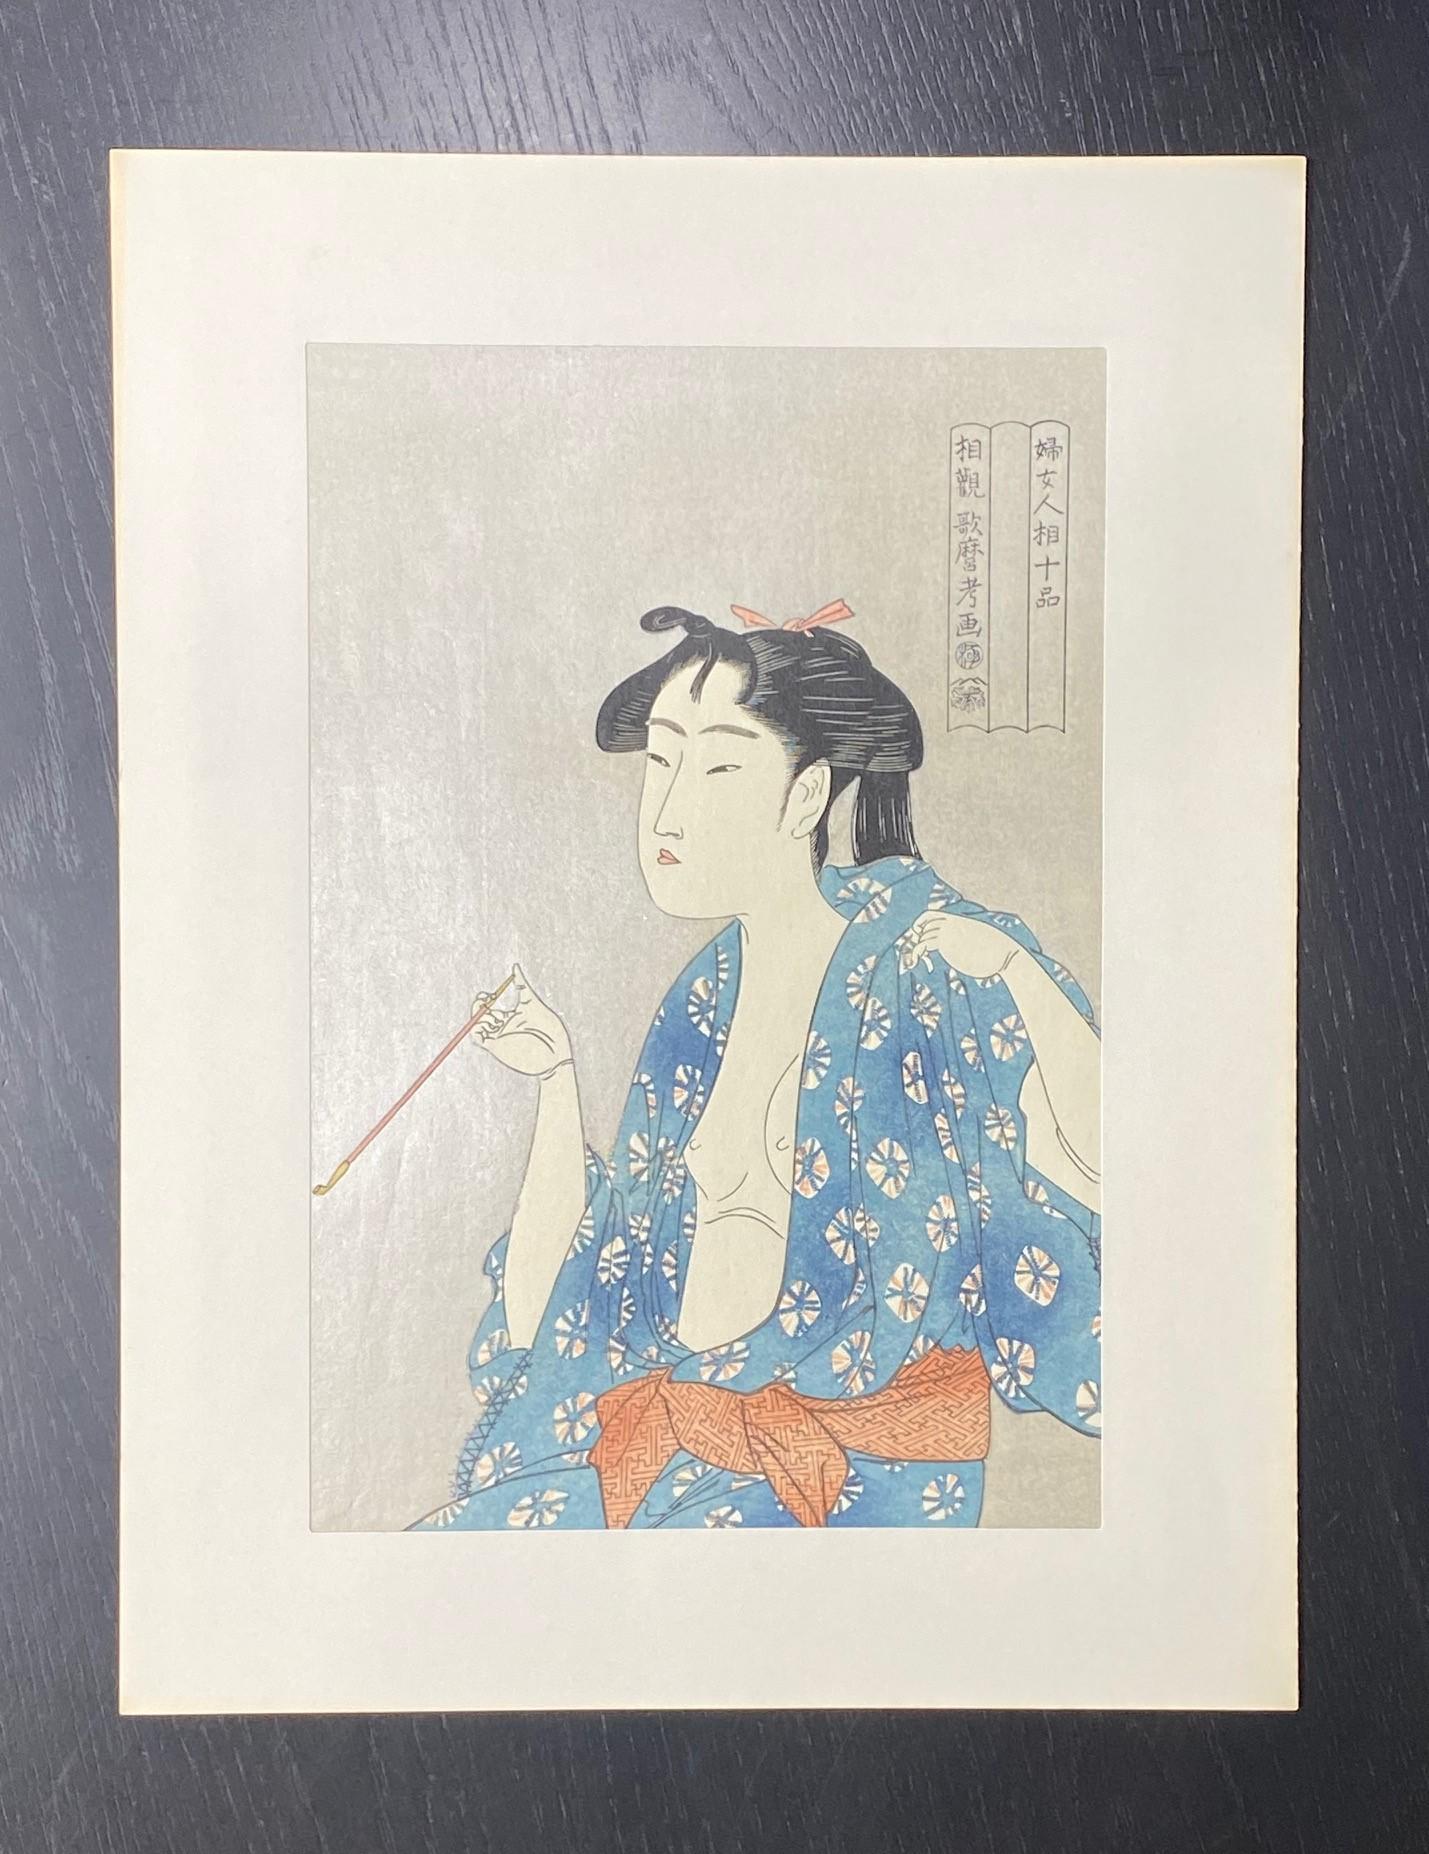 A beautifully composed and richly colored Japanese woodblock print by Kitagawa Utamaro featuring a semi-undressed kimono-opened nude woman, perhaps a Geisha or courtesan, enjoying a leisurely moment with her opium pipe.  A somewhat erotic and risqué